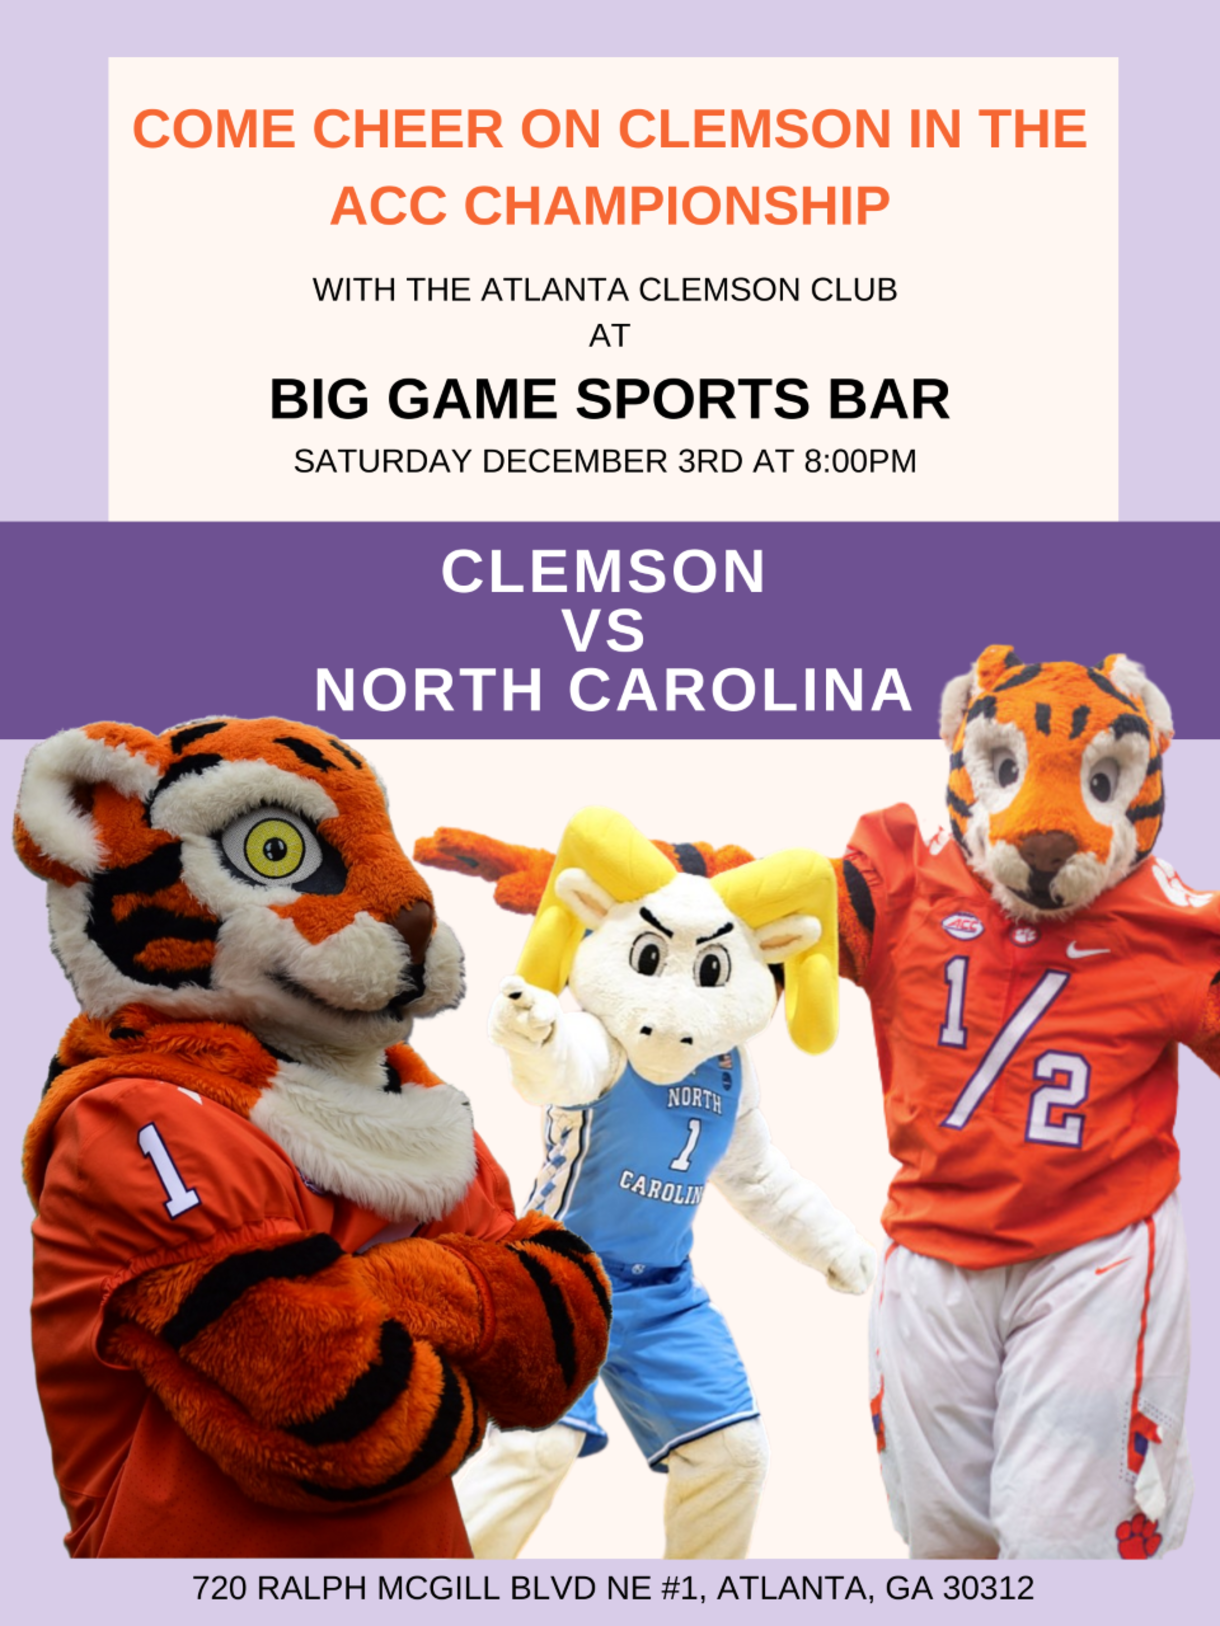 Come cheer on the Tigers against the Tarheels this Saturday in the ACC Championship at Big Game Sports Bar at 8pm